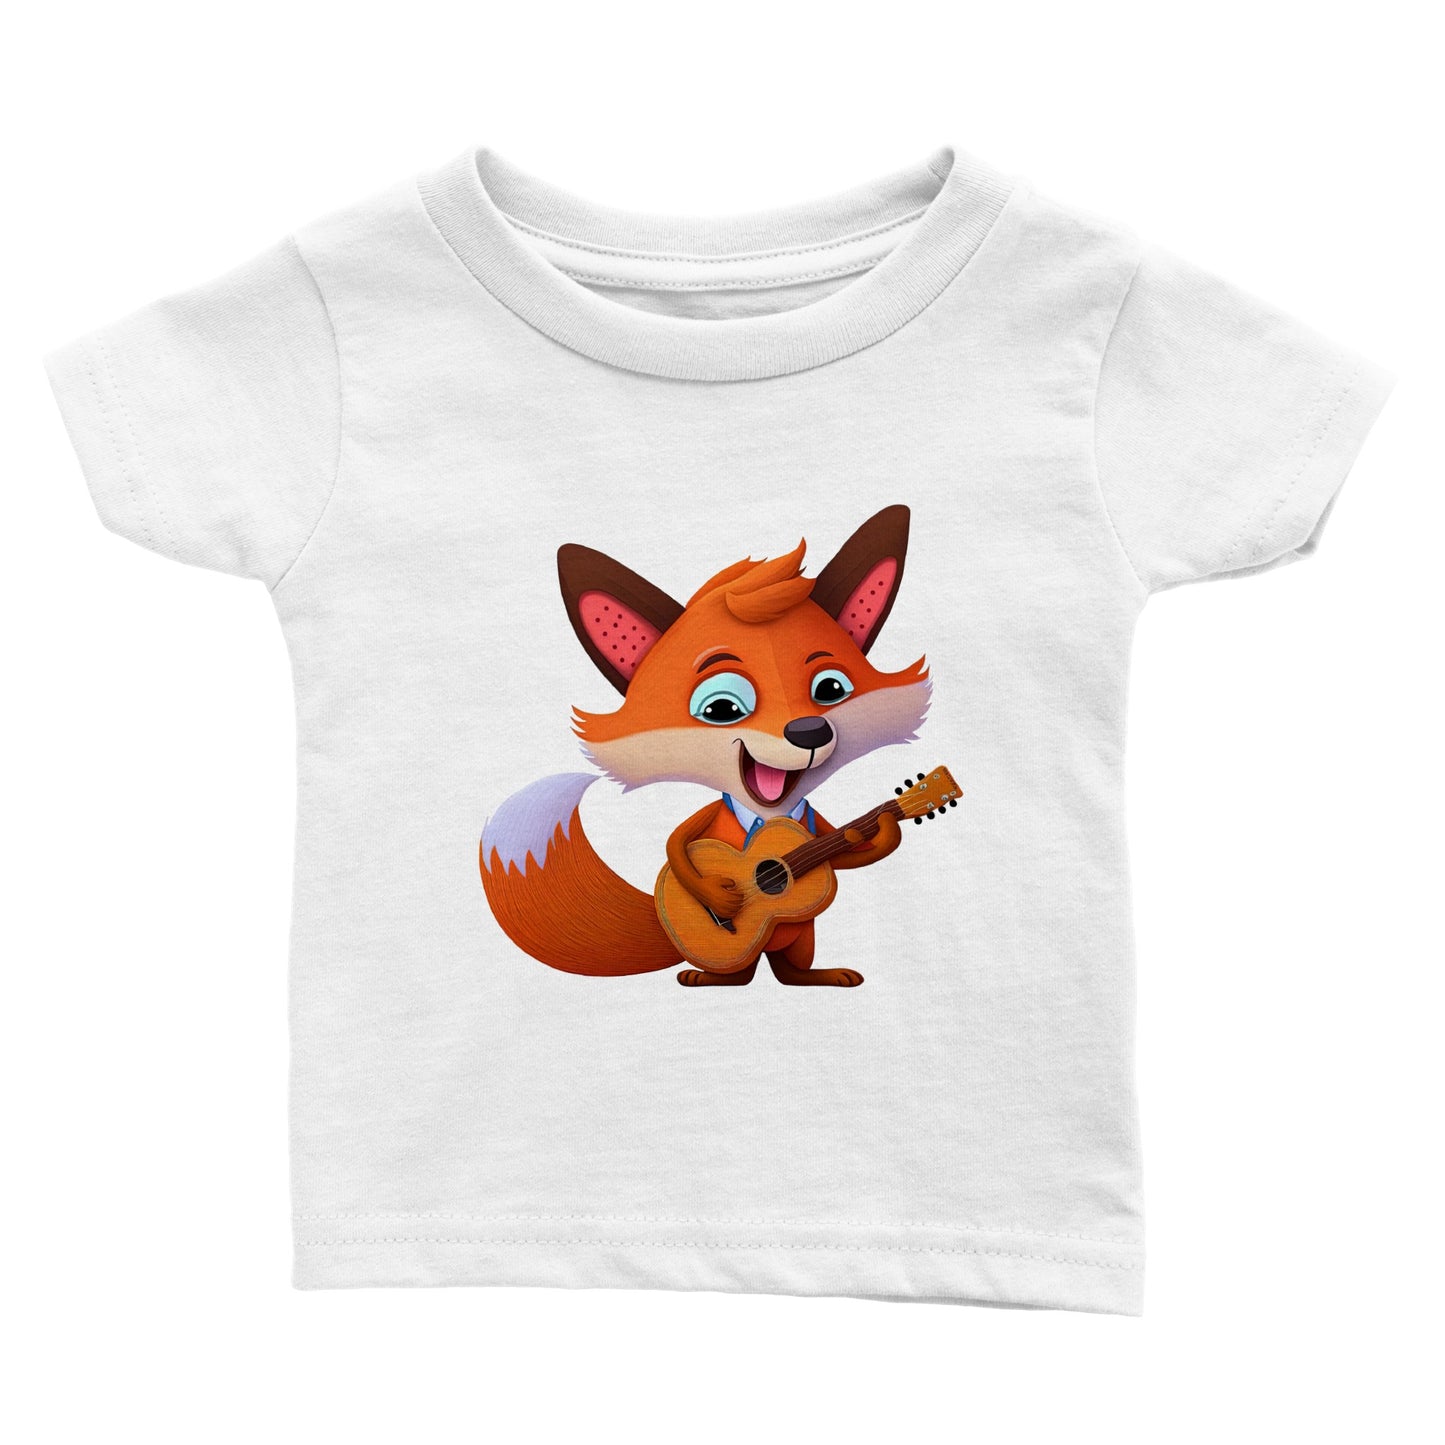 Babies white t-shirt with cute fox playing a guitar